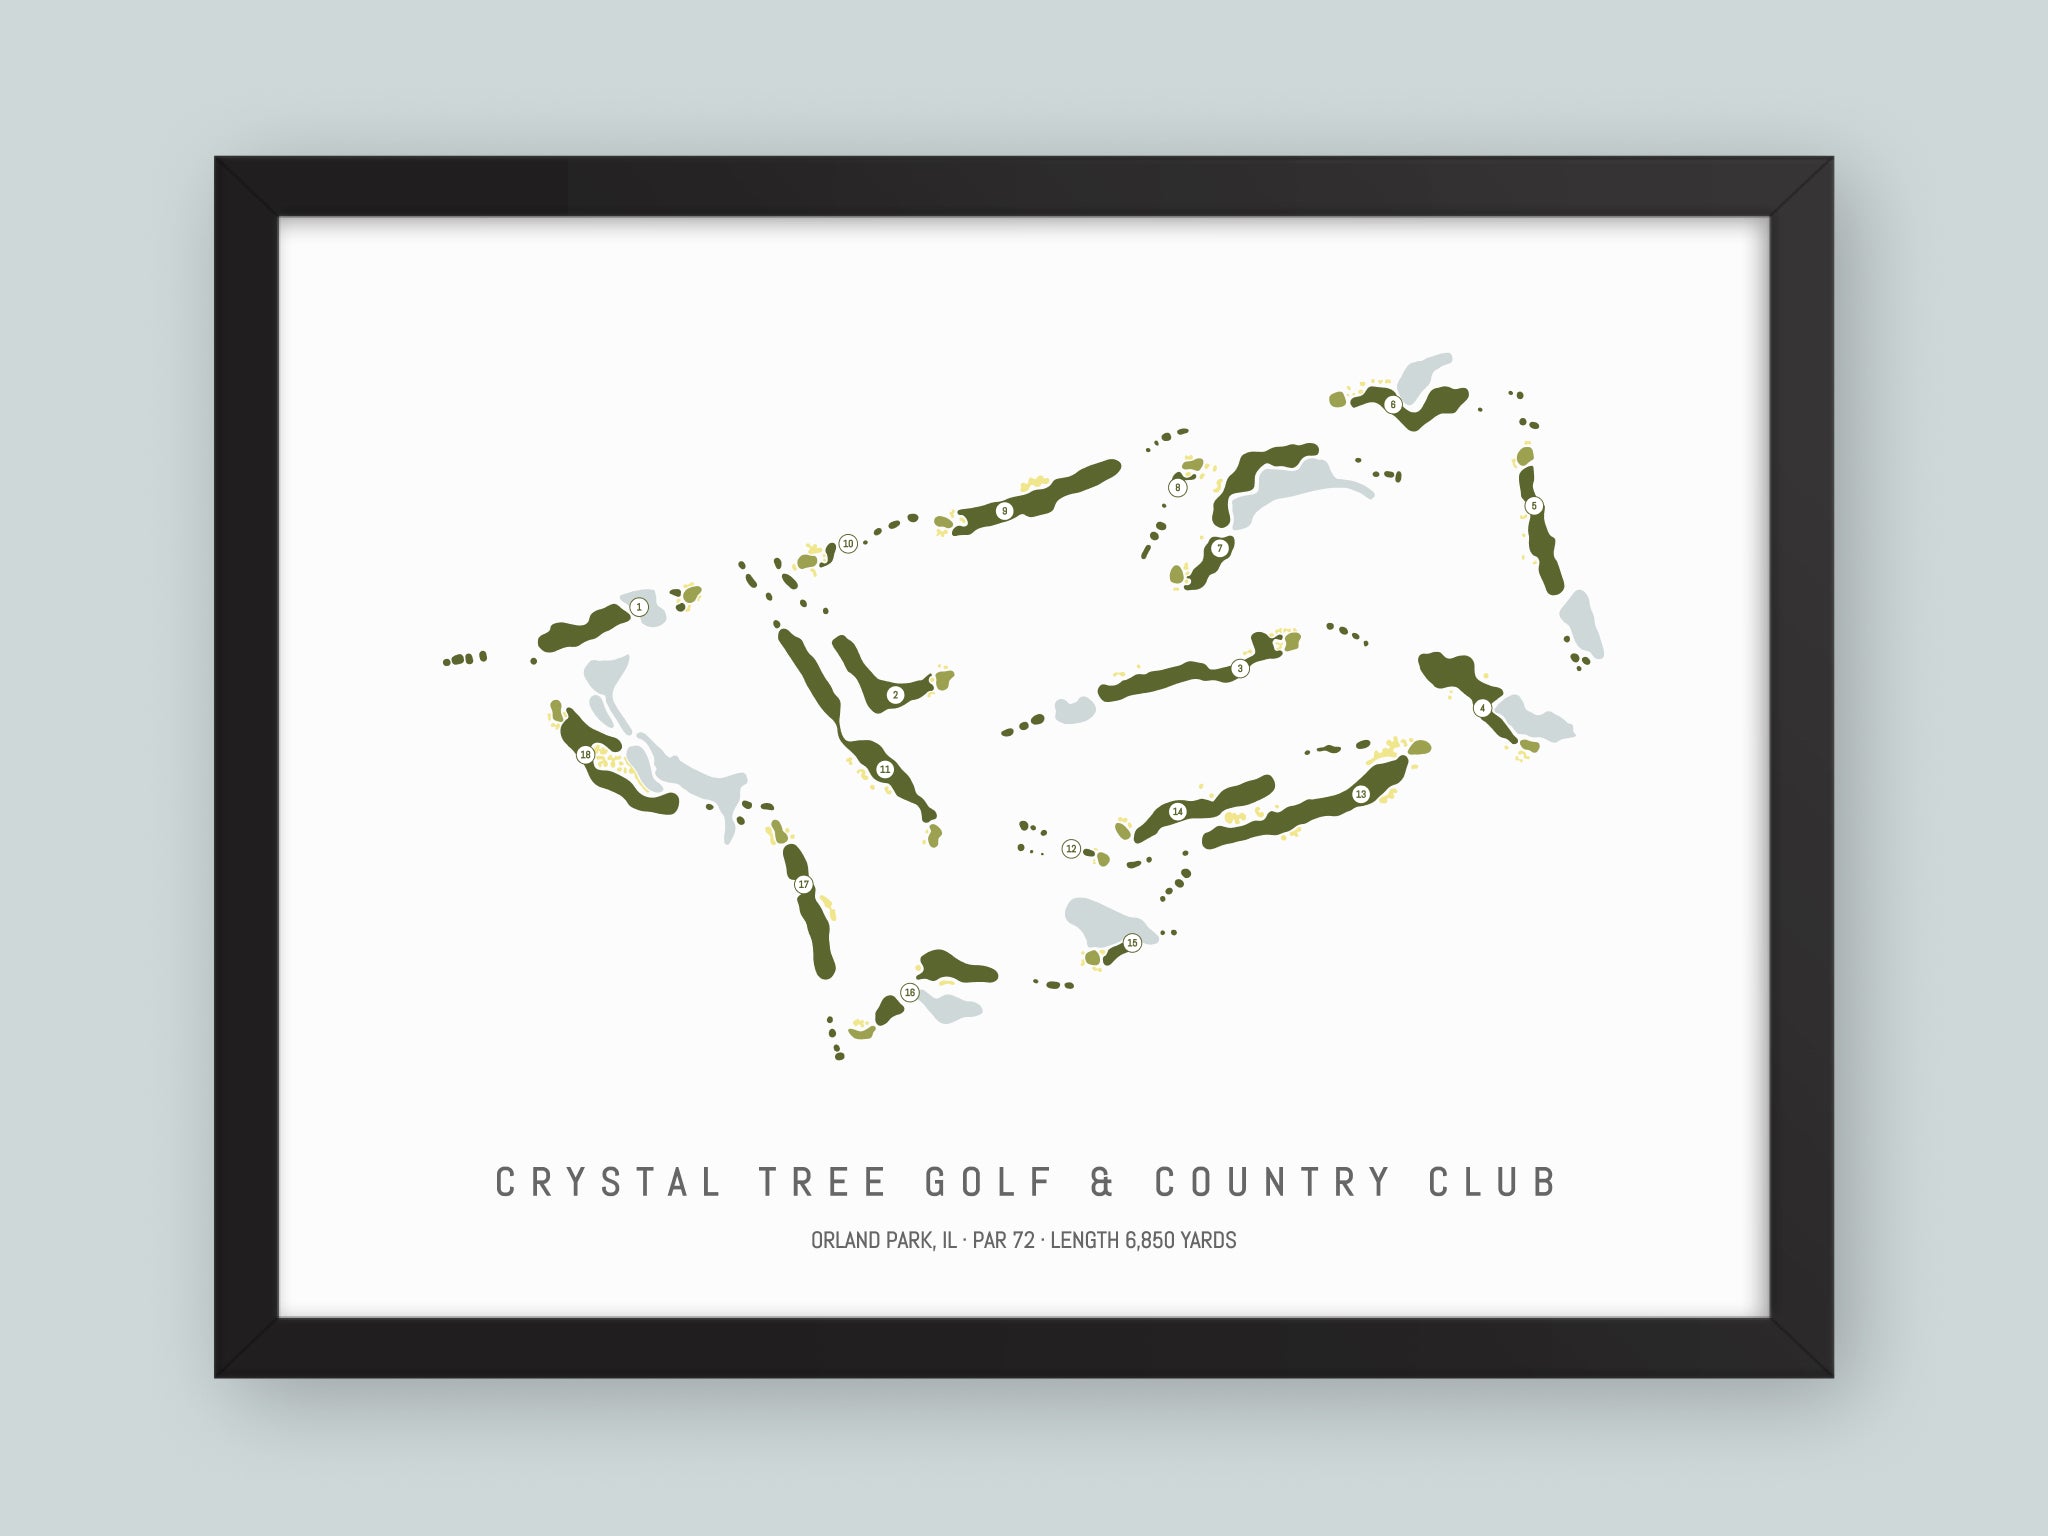 Crystal-Tree-Golf-And-Country-Club-IL--Black-Frame-24x18-With-Hole-Numbers